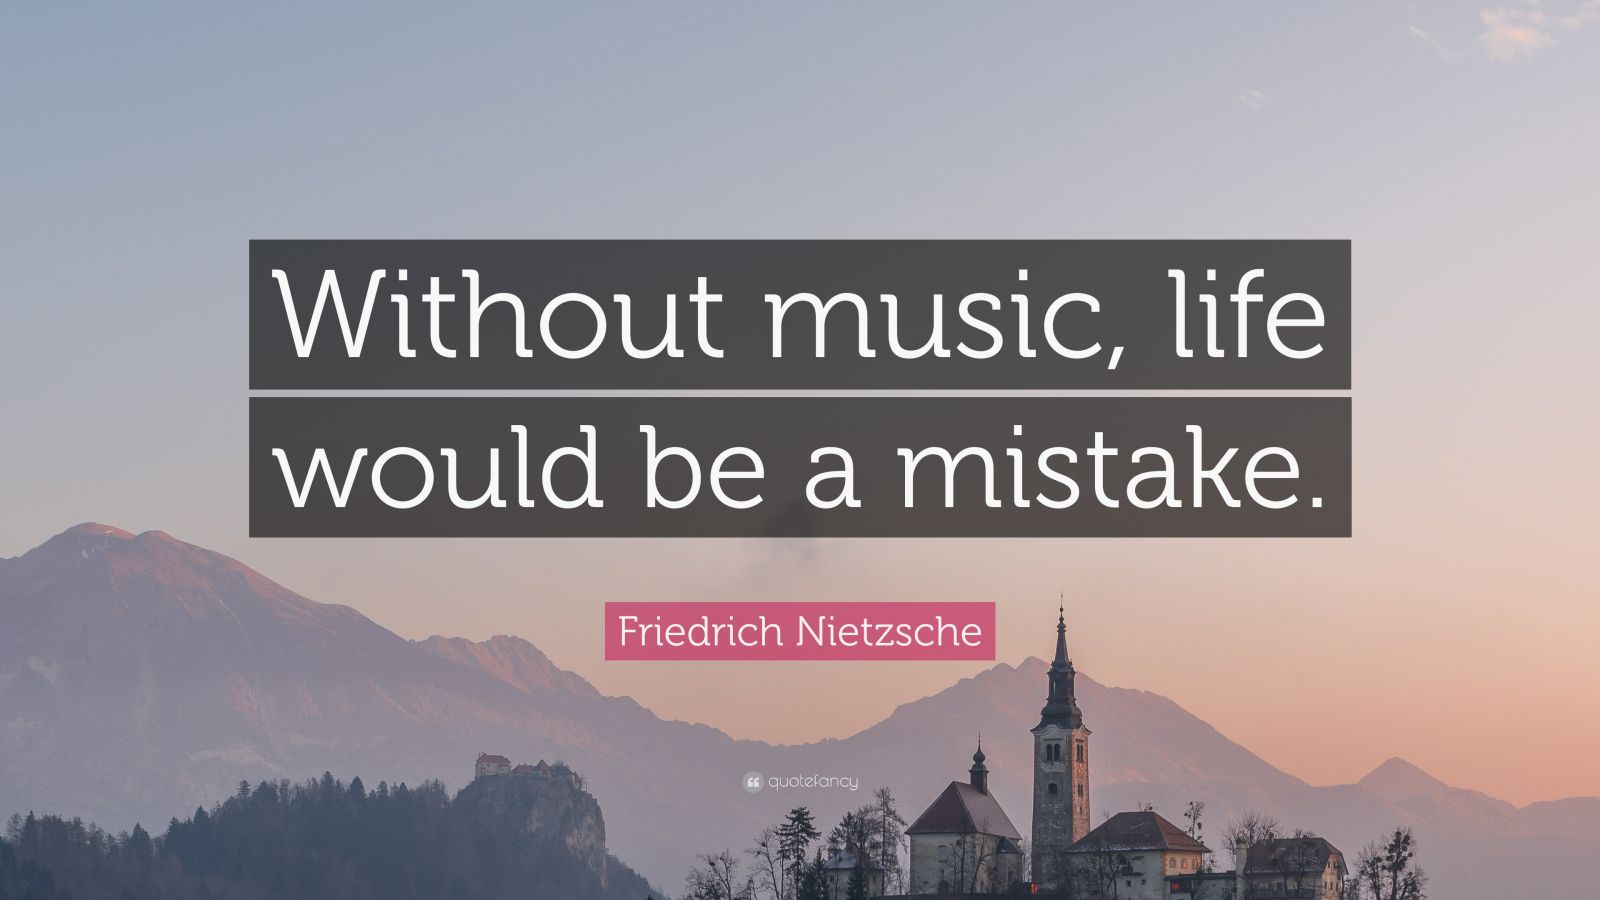 Friedrich Nietzsche Quote: "Without music, life would be a mistake." (20 wallpapers) - Quotefancy